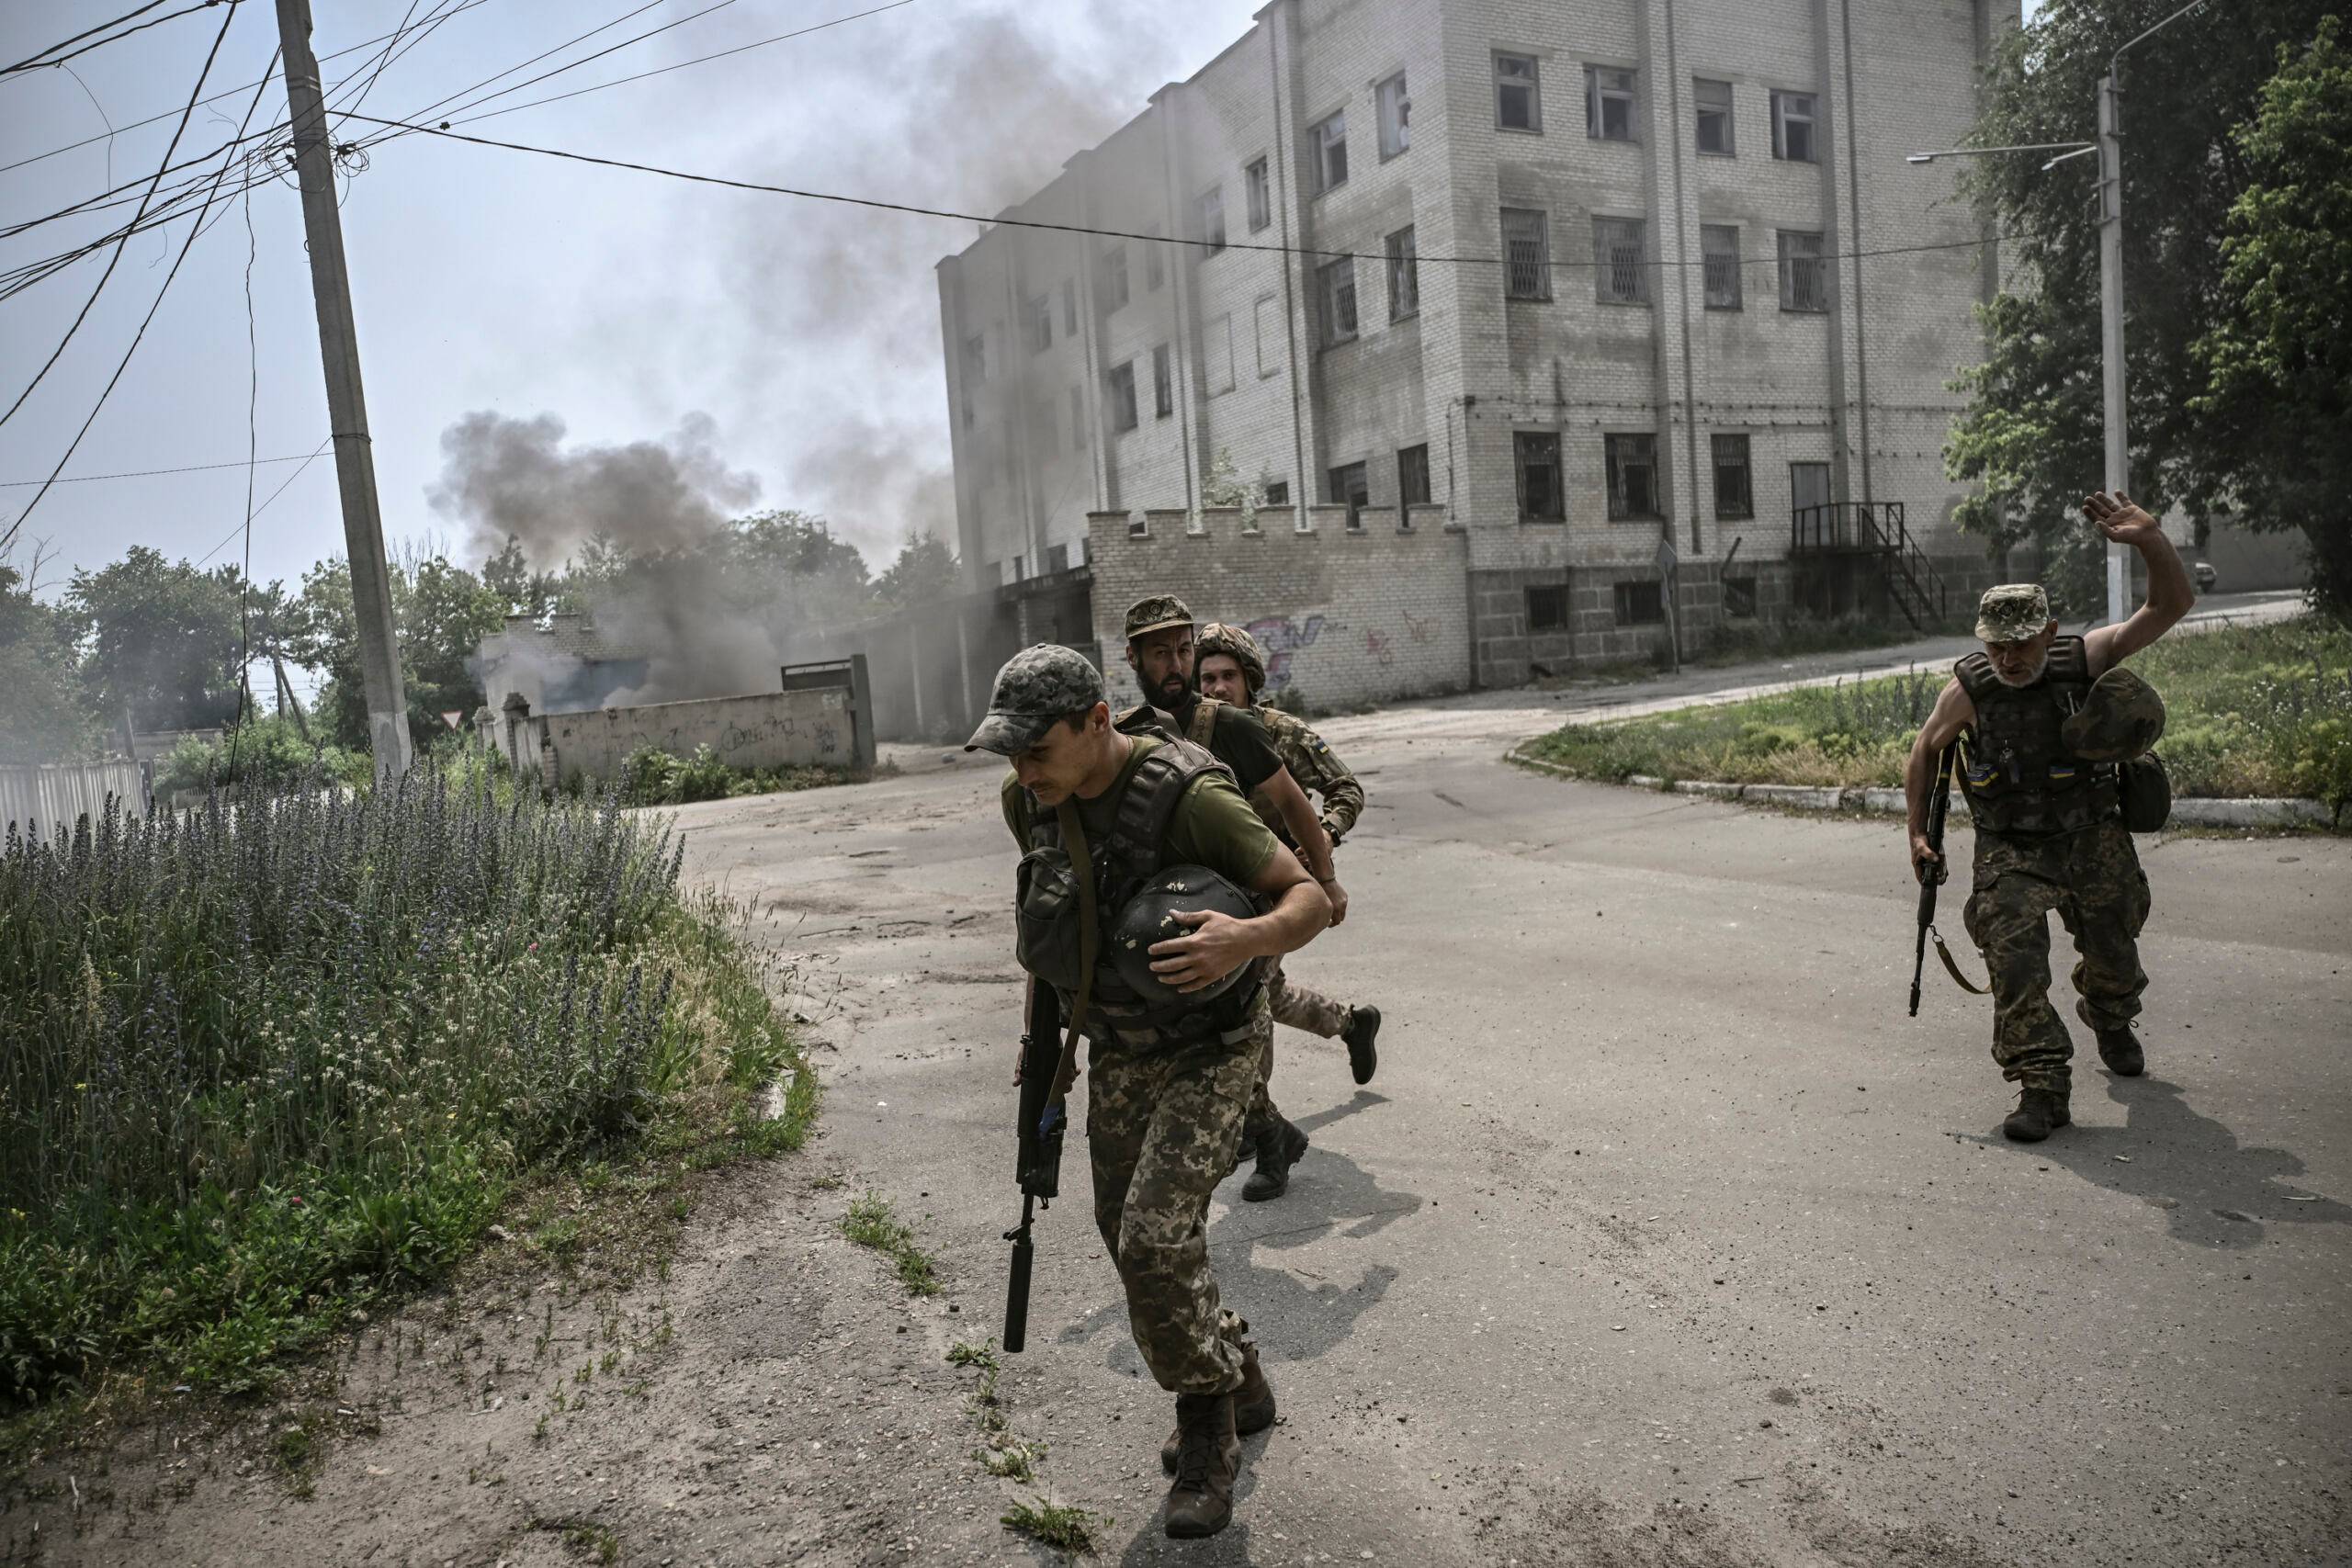 Ukrainian servicemen run for cover during an artillery duel between Ukrainian and Russian troops in the city of Lysychansk, eastern Ukrainian region of Donbas, on June 11, 2022. (Photo by ARIS MESSINIS / AFP)